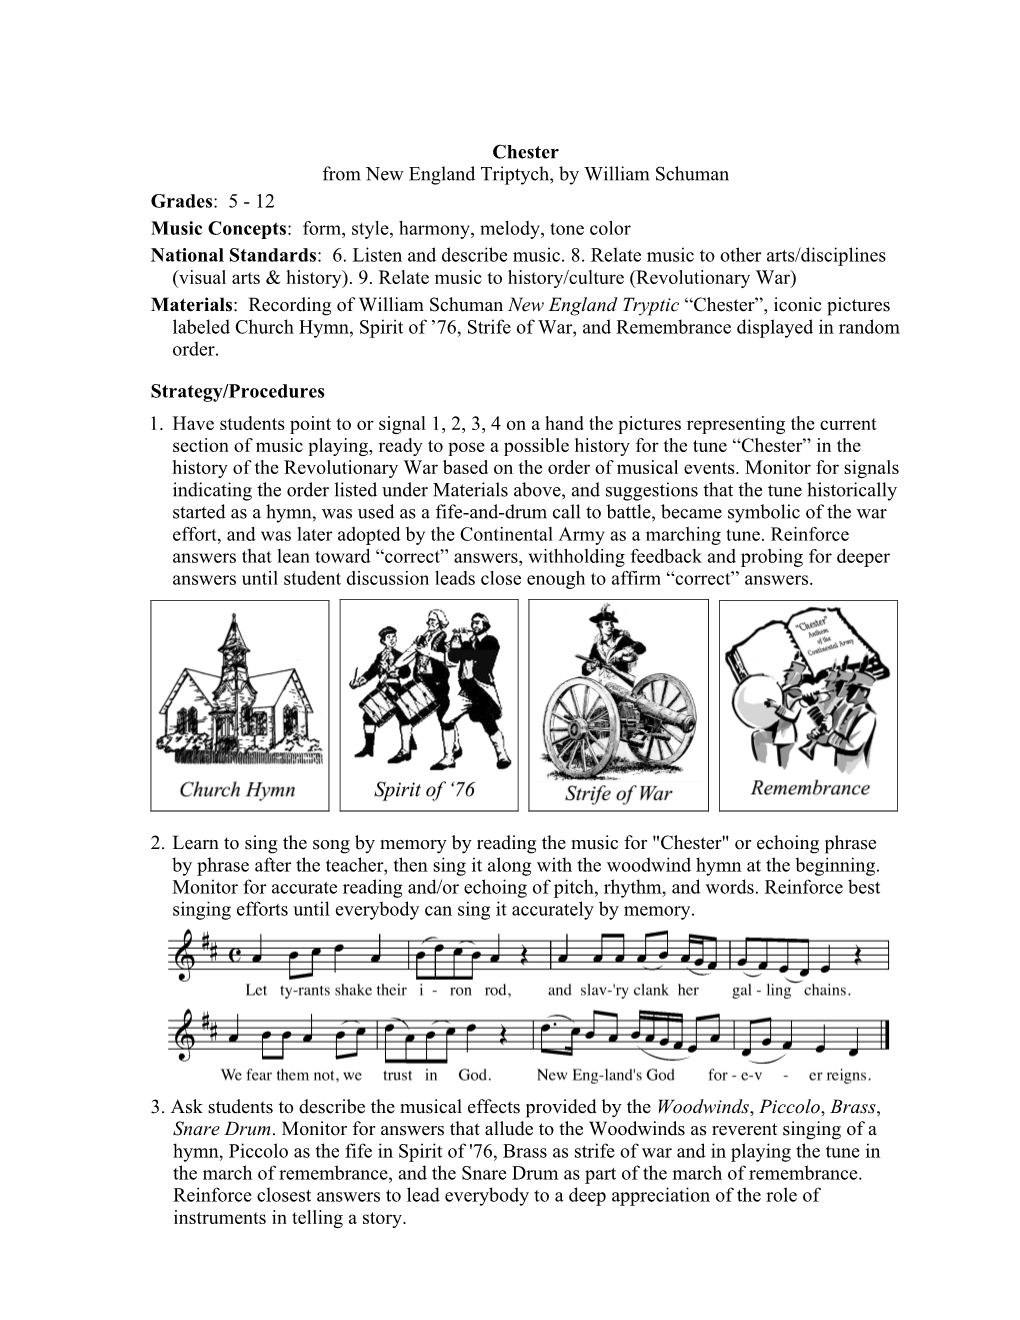 Chester from New England Triptych, by William Schuman Grades: 5 - 12 Music Concepts: Form, Style, Harmony, Melody, Tone Color National Standards: 6